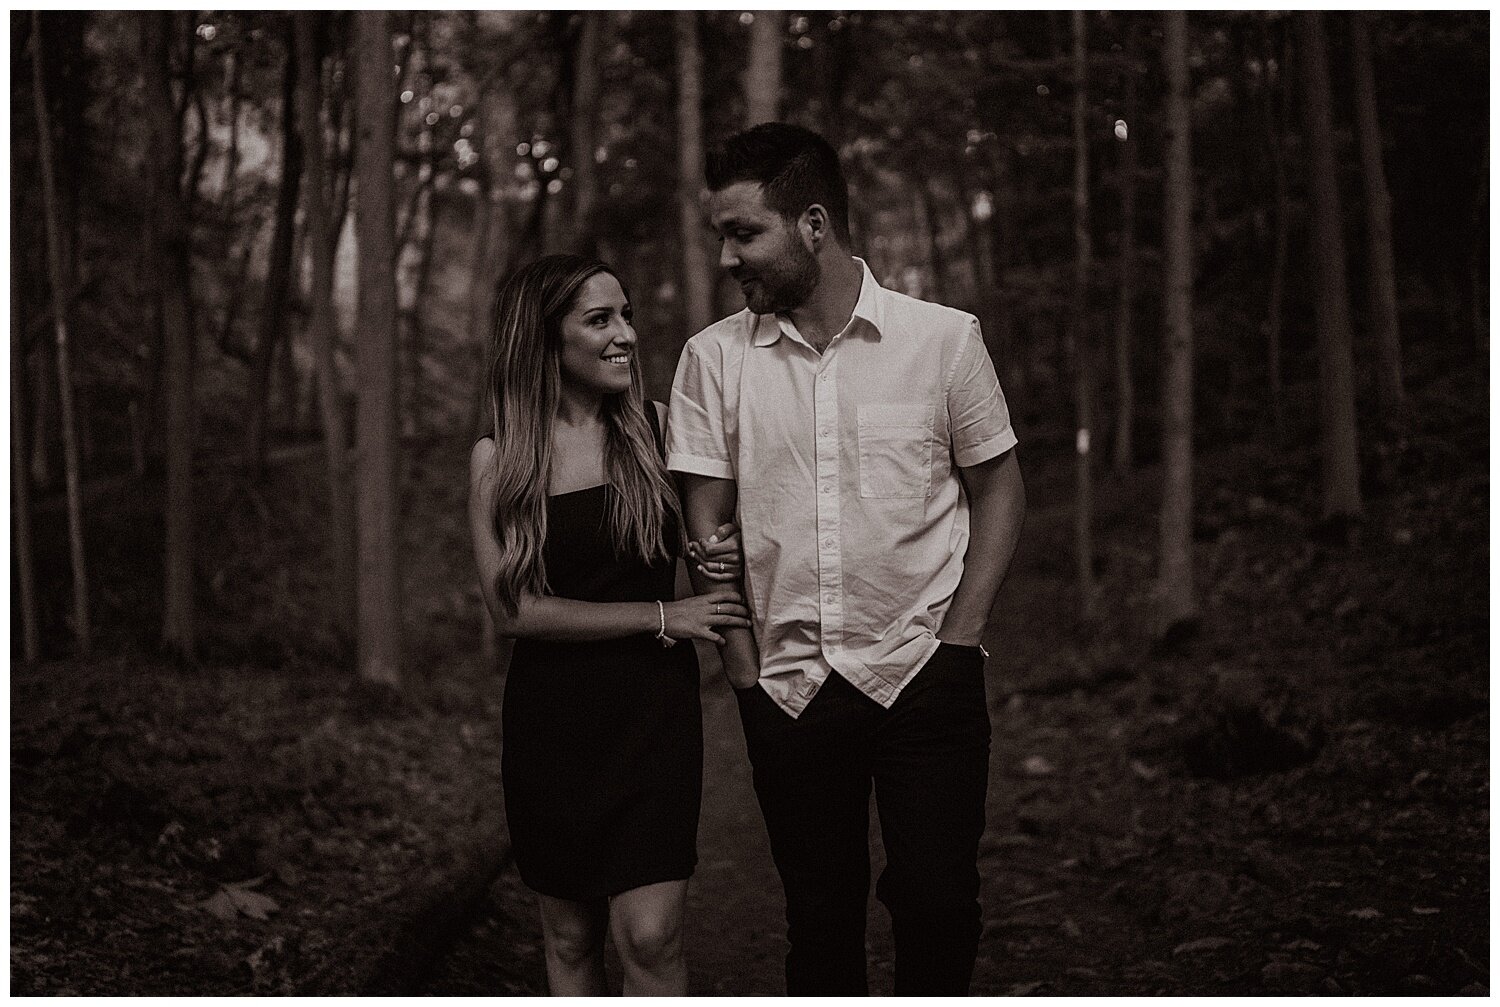 Cotton_Factory_And_Waterfall_Engagement_Session_Hamilton_Ontario_Wedding_Photographer_0095.jpg